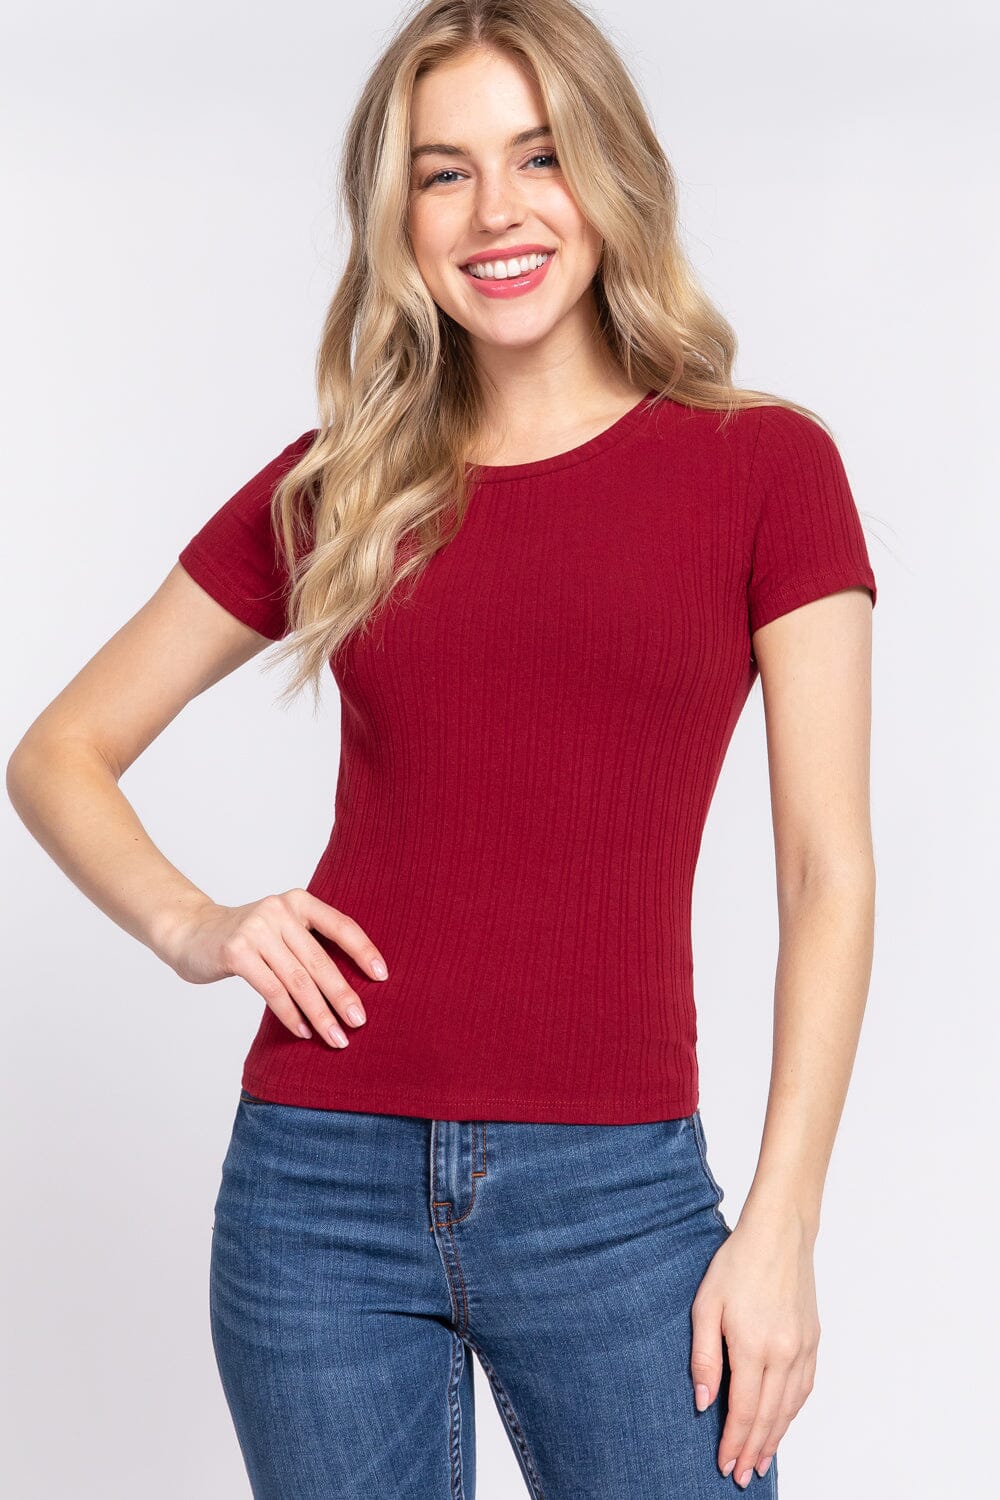 Wine Red Basic Casual Short Sleeve Crew Neck Variegated Rib Knit Top Shirts & Tops jehouze 